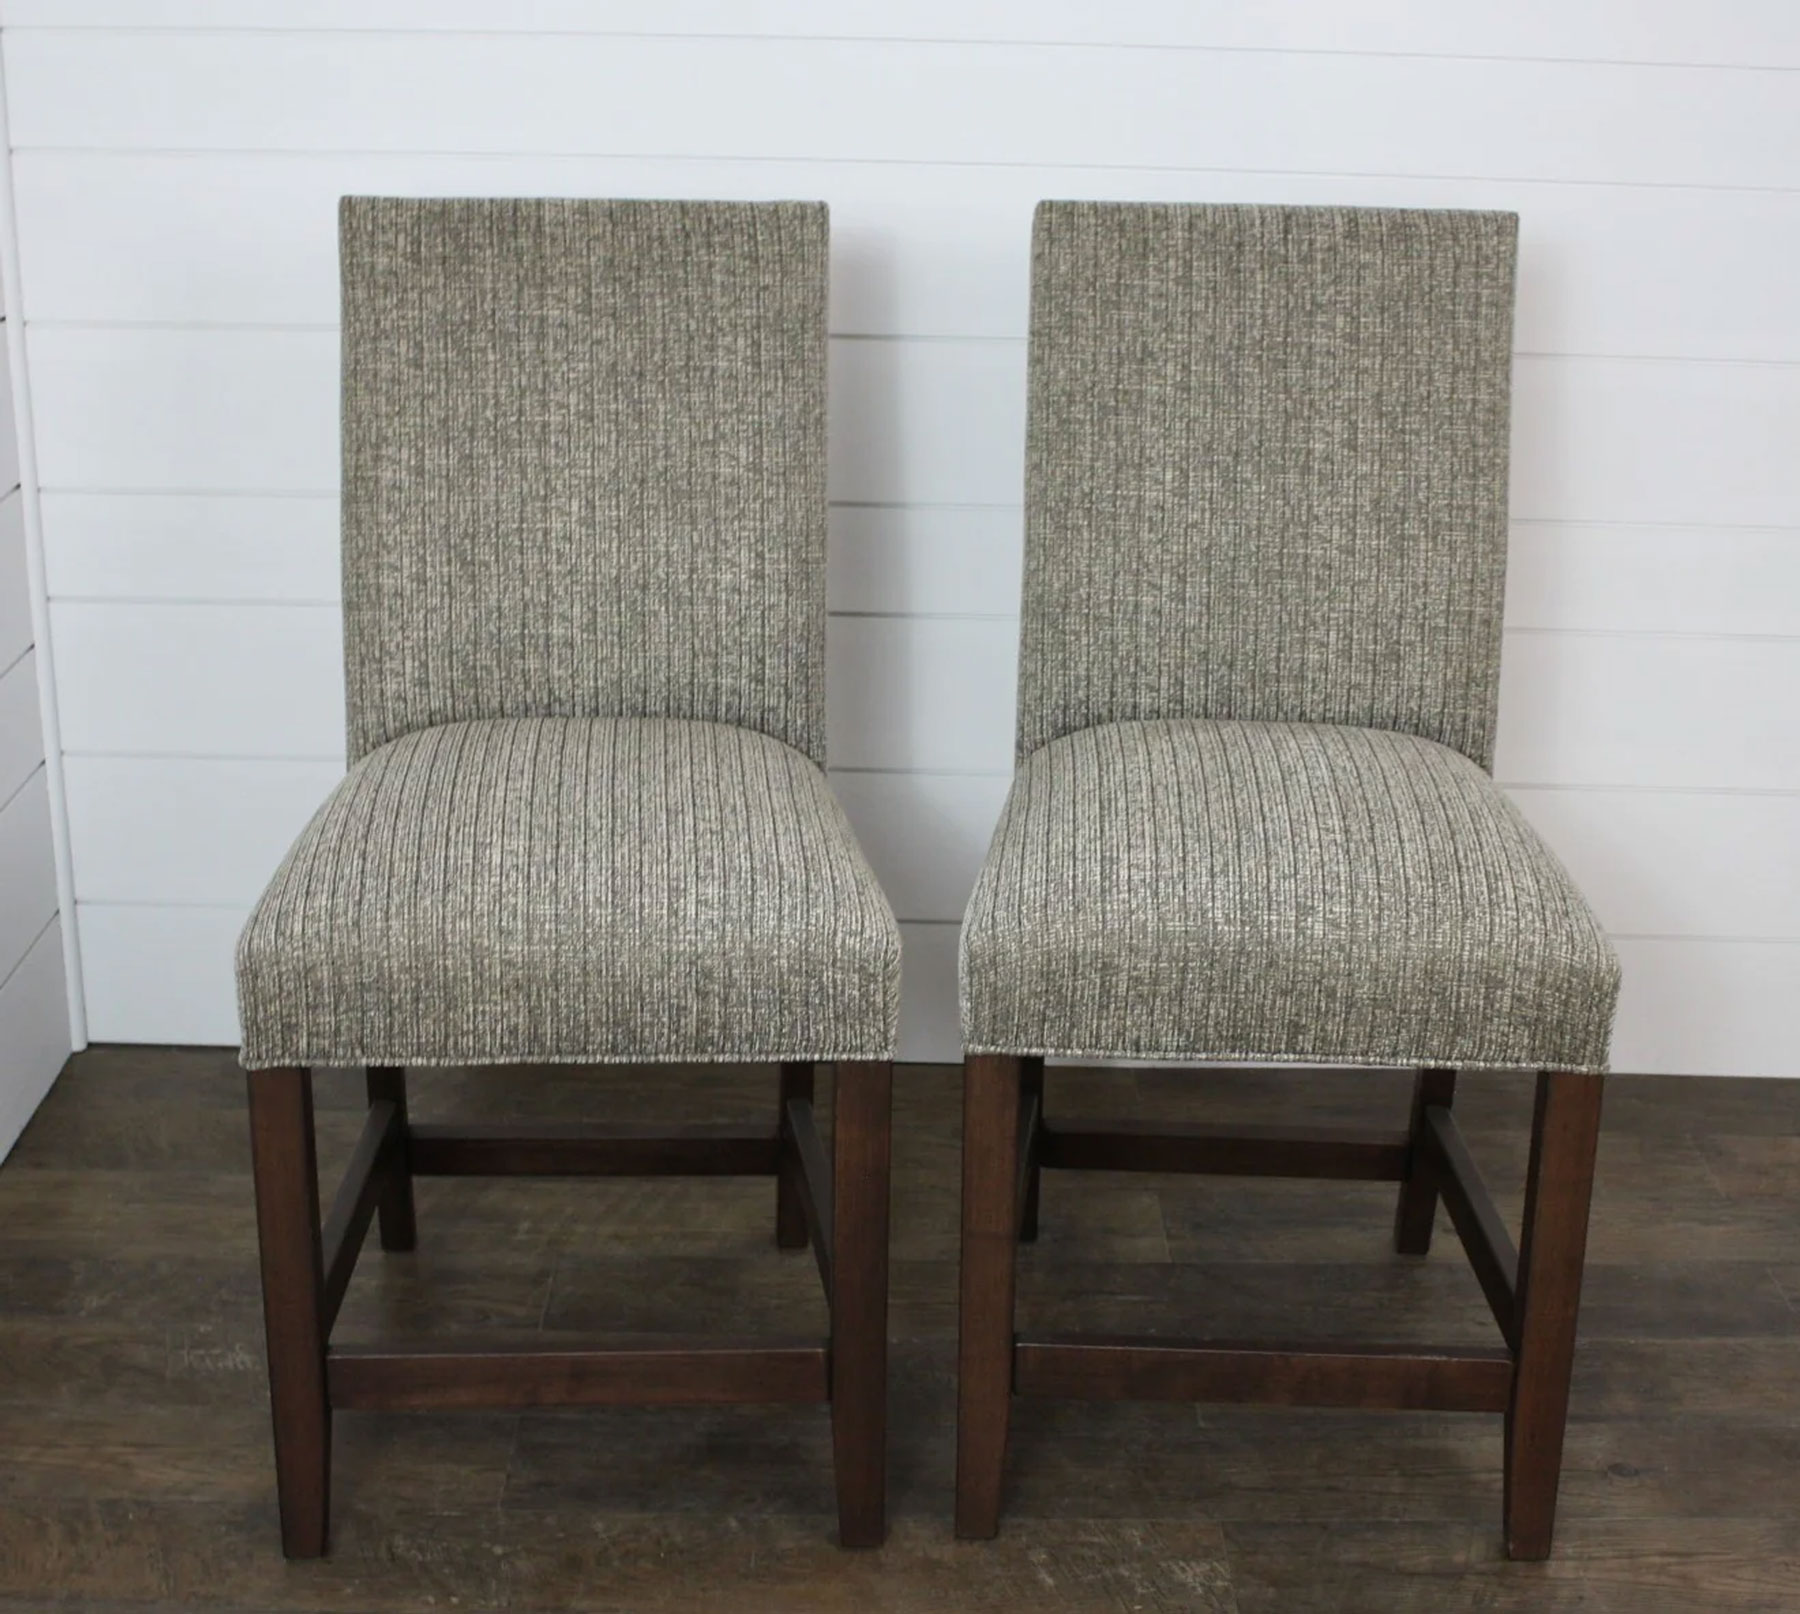 (2) Hudson Side Bar Chairs in Missy 25-14 Fabric